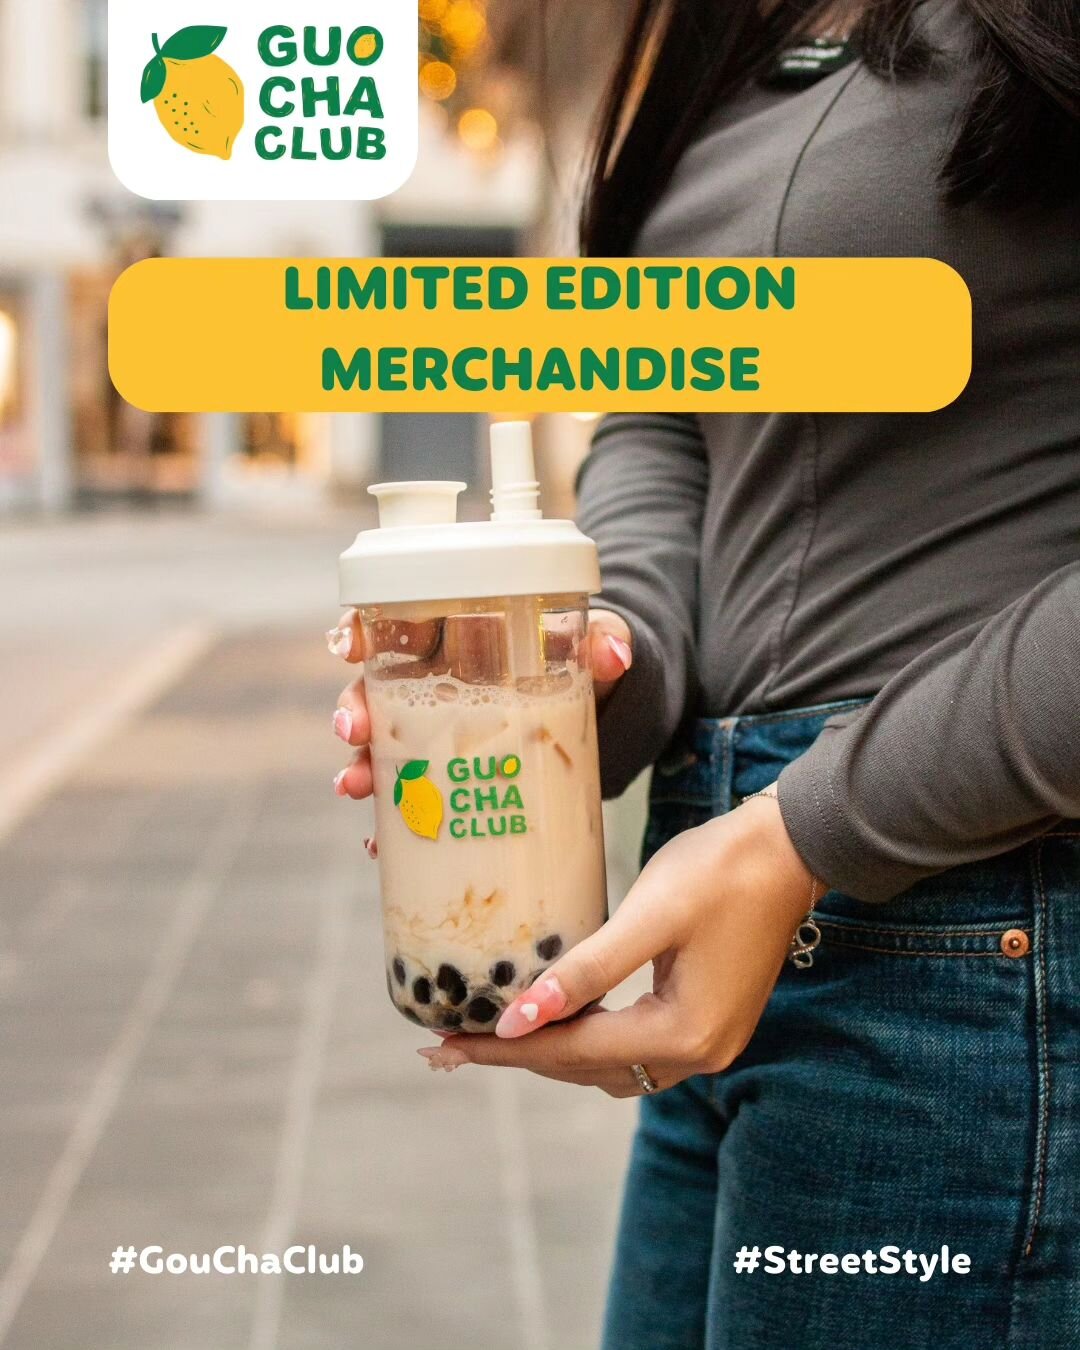 🎉 The moment you've all been waiting for is finally here! 🌟 Our First Limited Edition Mech Line has landed and is now available for sale! 🚀

Check out our exclusive items, but hurry, quantities are limited:

1️⃣ Cup Sleeve - &euro;7
Carry your cup